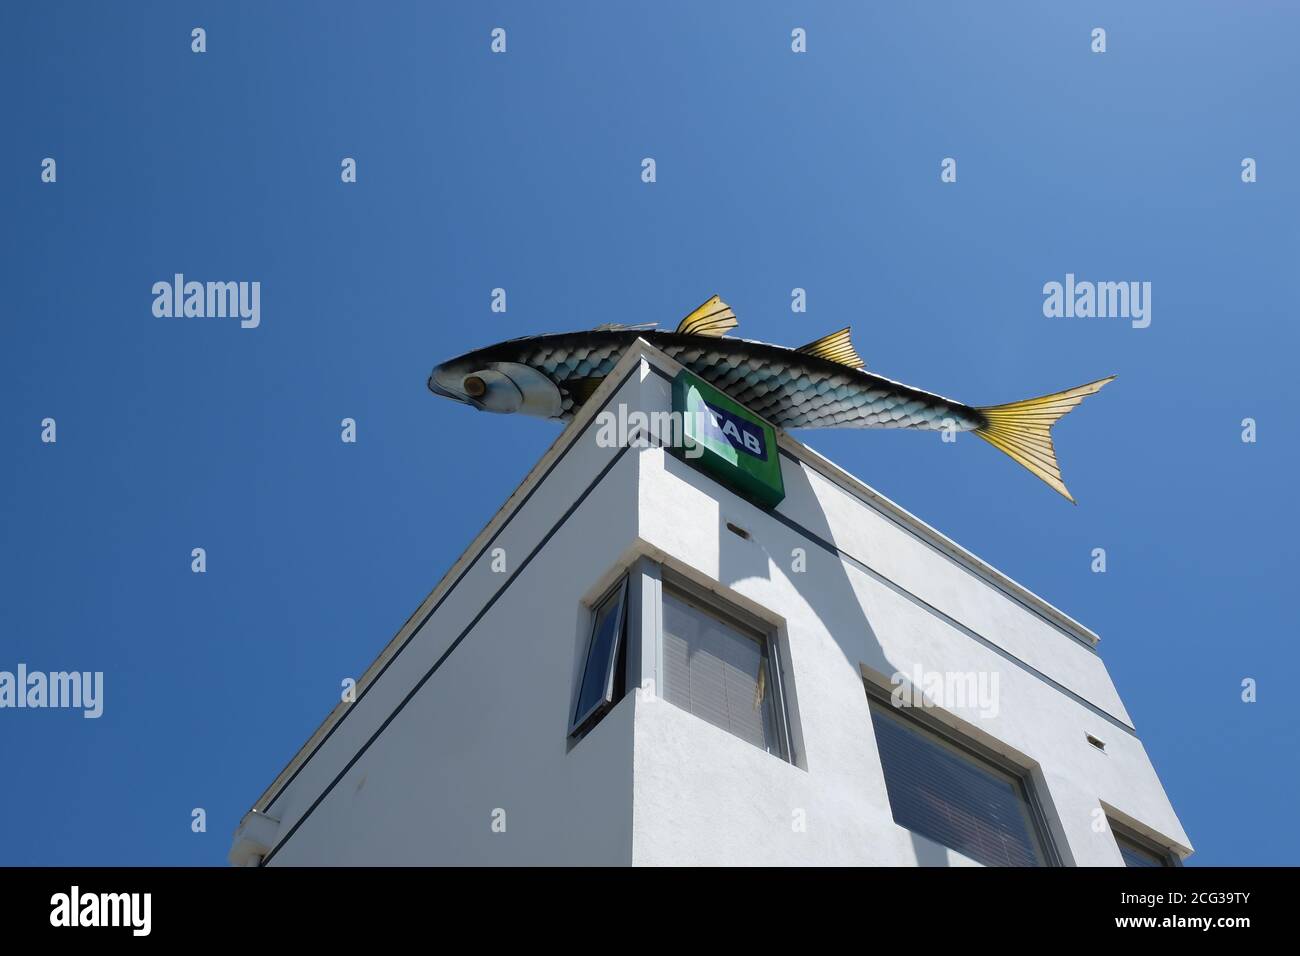 Fish sculpture by artist Colin Suggett on the rooftop of the Fish Creek Hotel, Victoria, Australia Stock Photo